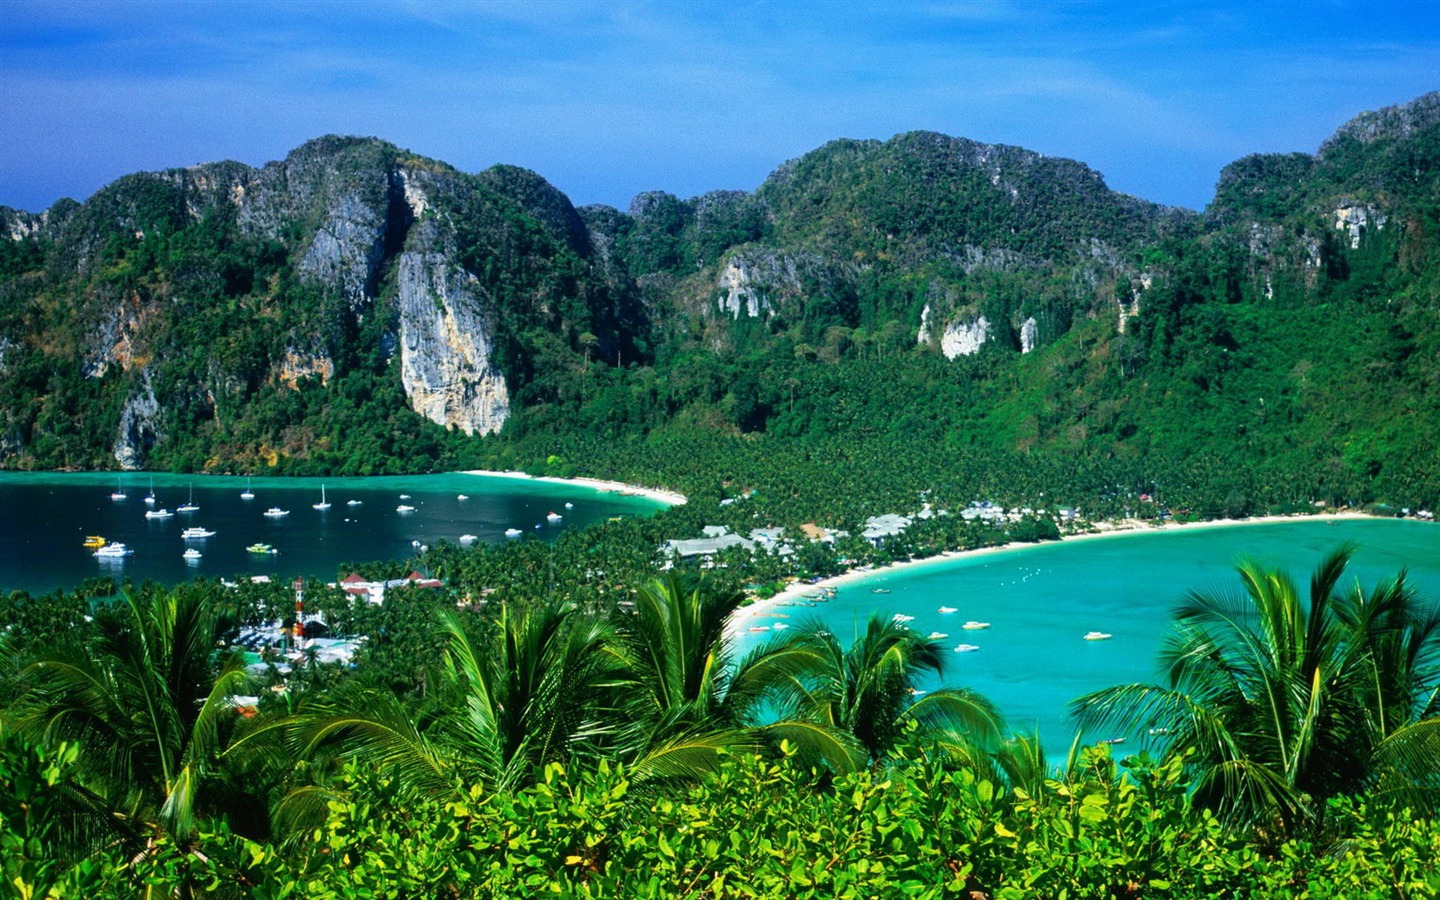 Thailand's natural beauty wallpapers #6 - 1440x900